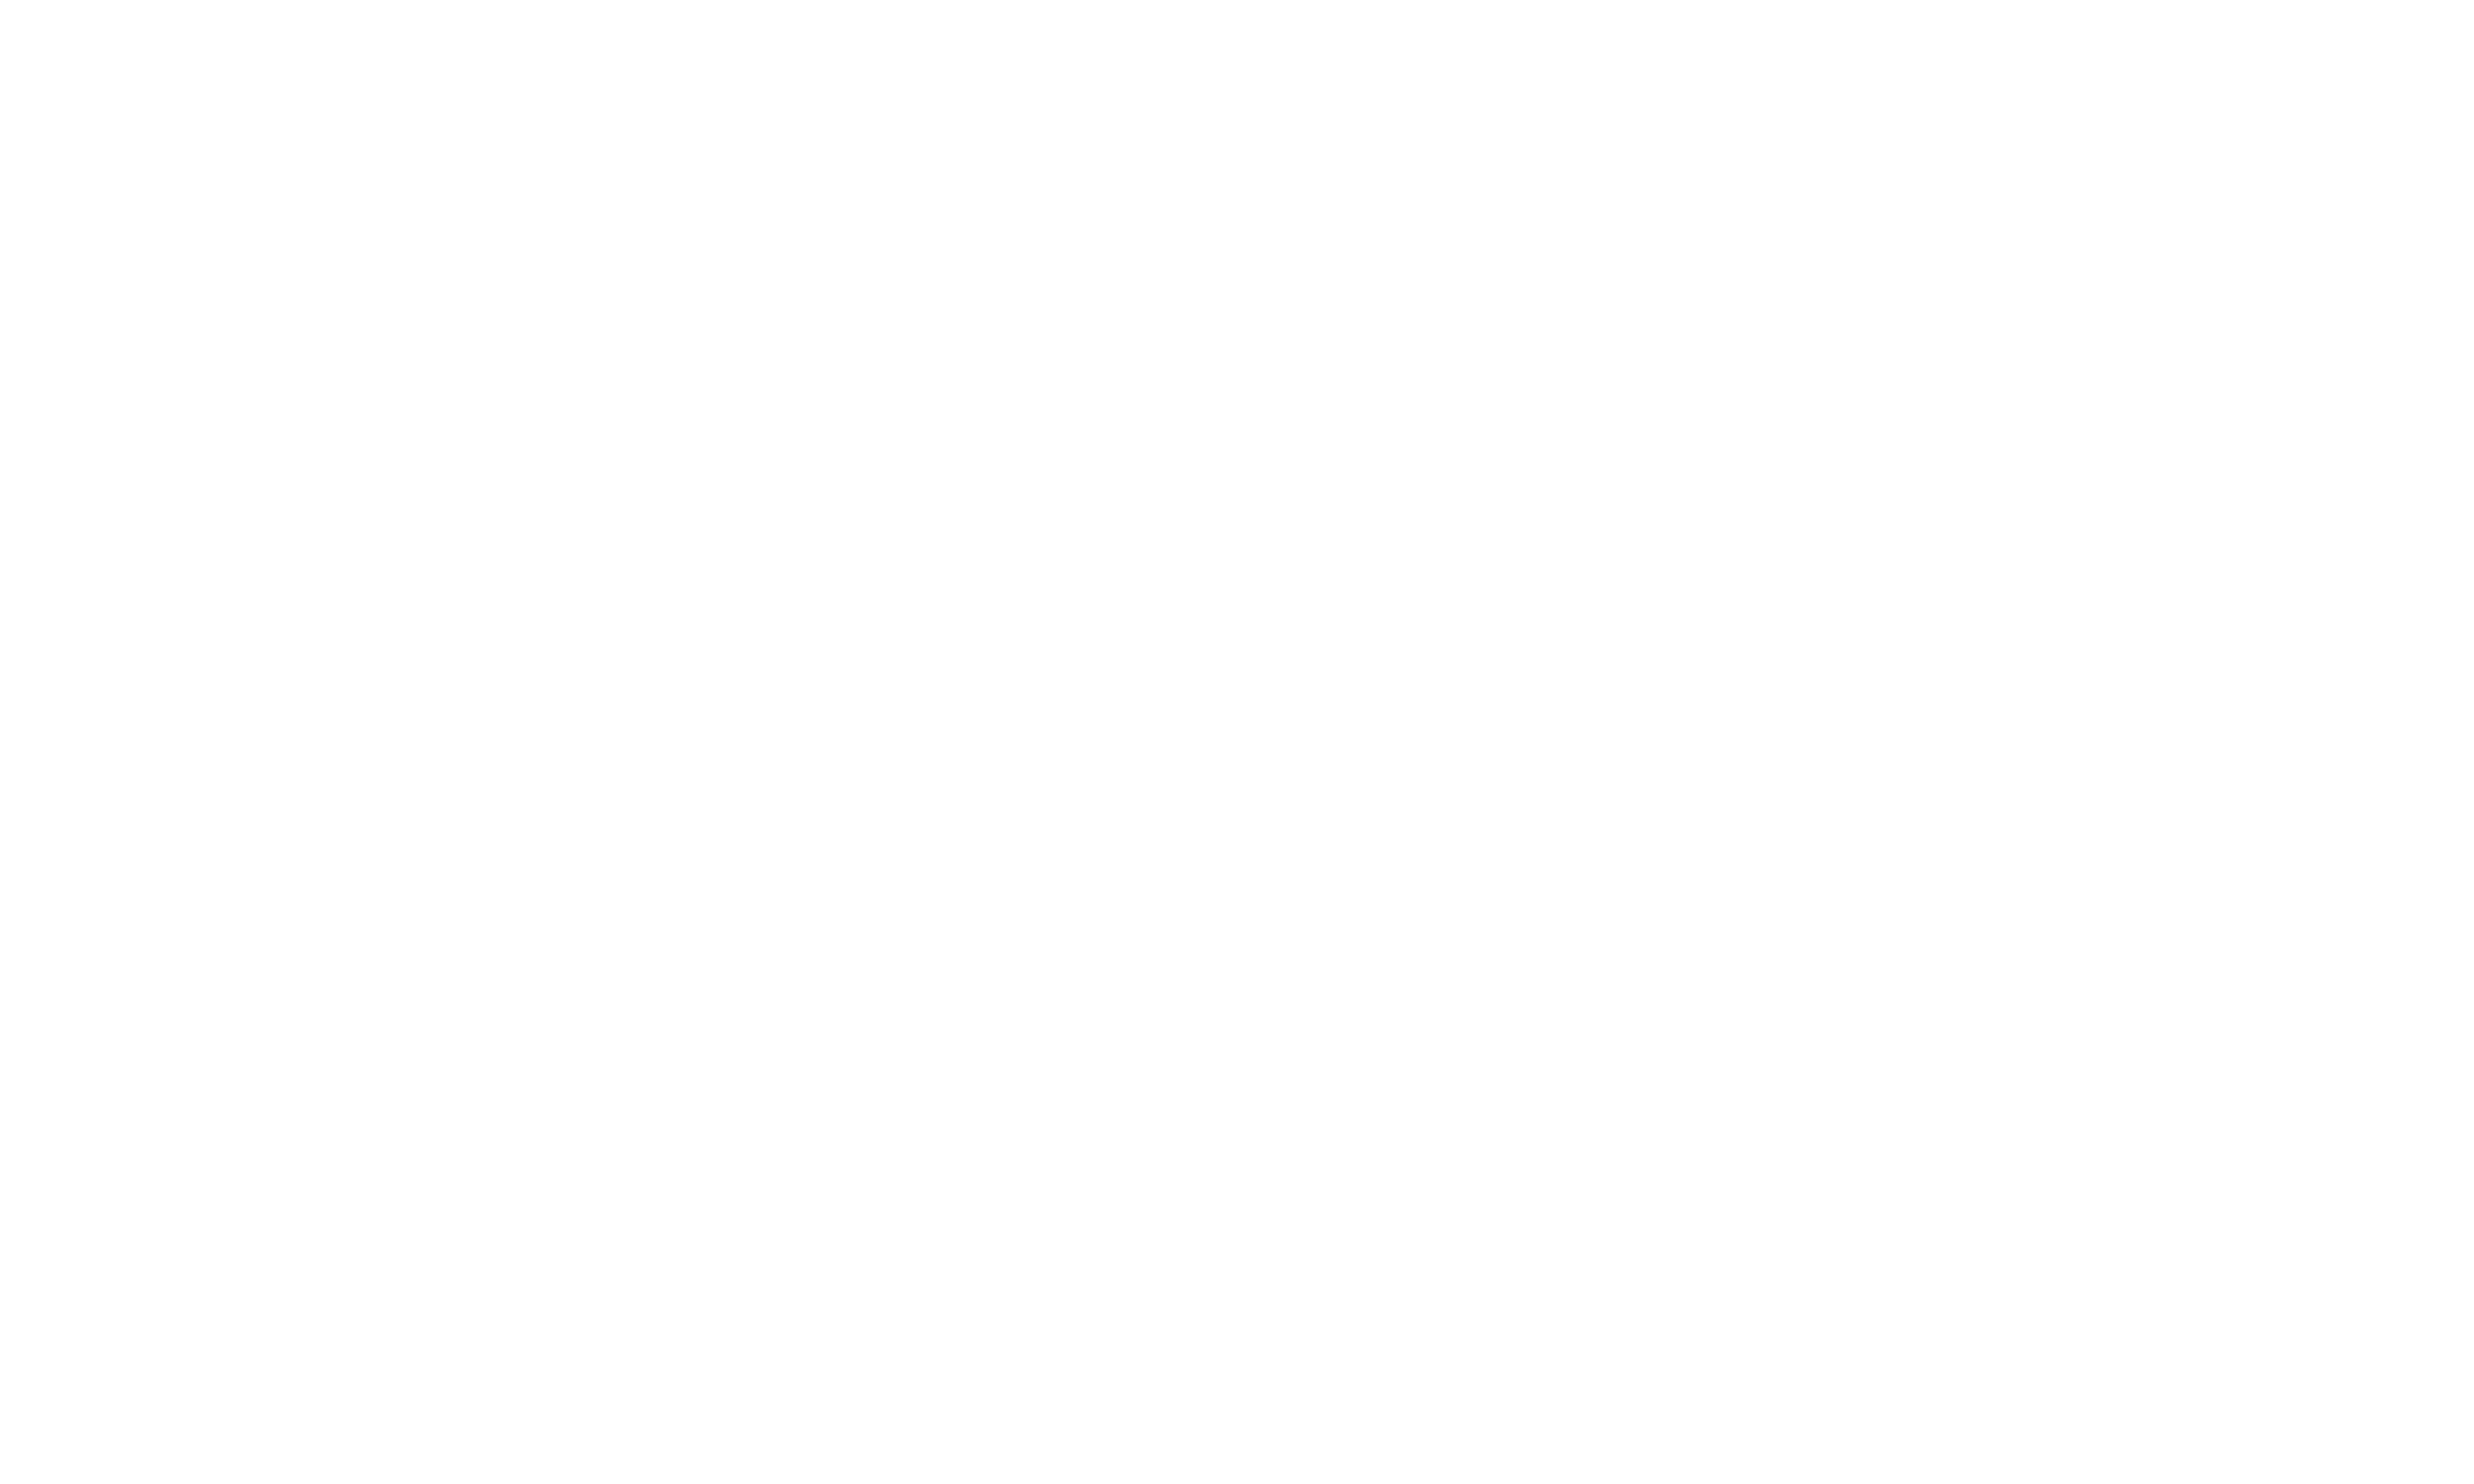 Sentry Real Estate Expands Into All Texas Markets Enabling Homeowners To Sell Their Homes Fast and Efficiently